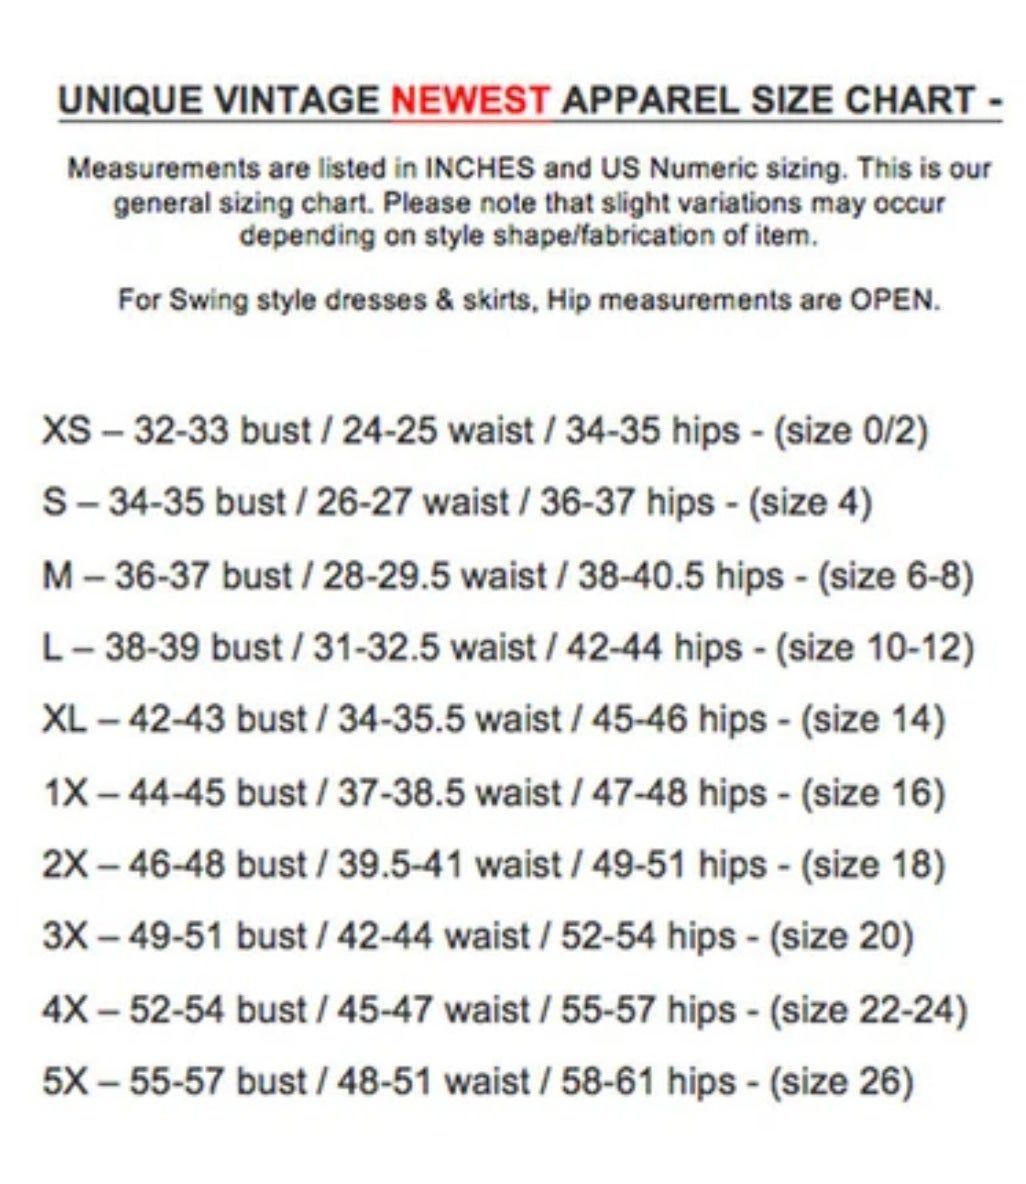 General Sizing Chart